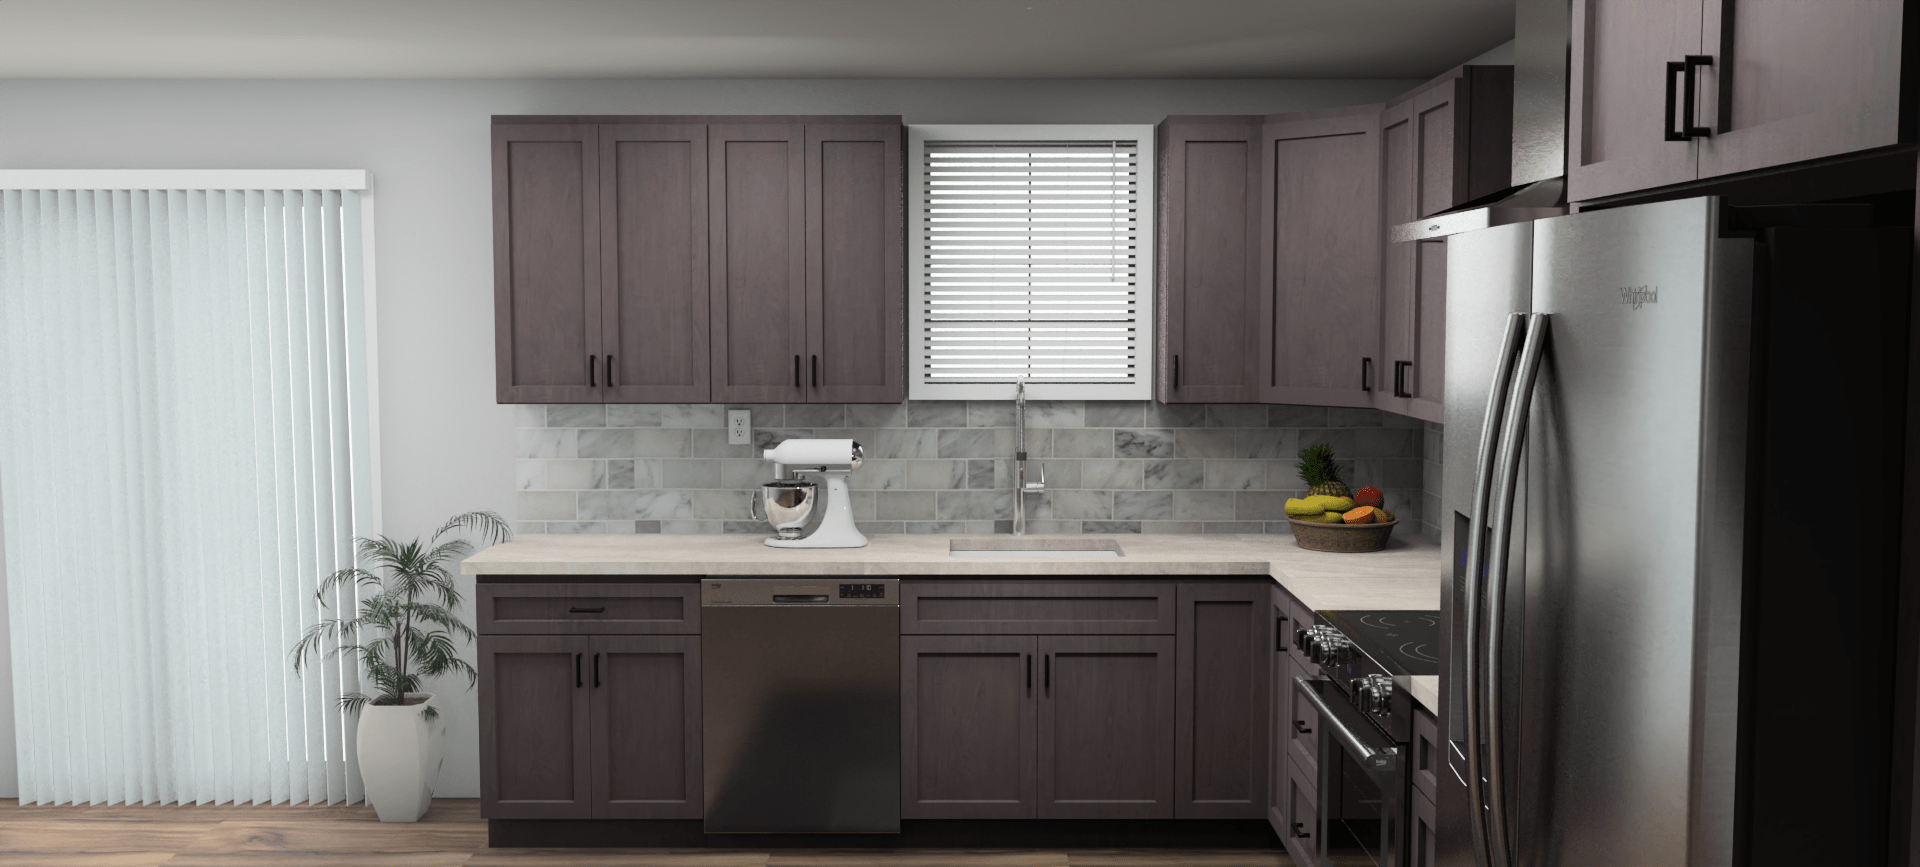 Pioneer The Cinder Grey 10 x 13 L Shaped Kitchen Side Layout Photo